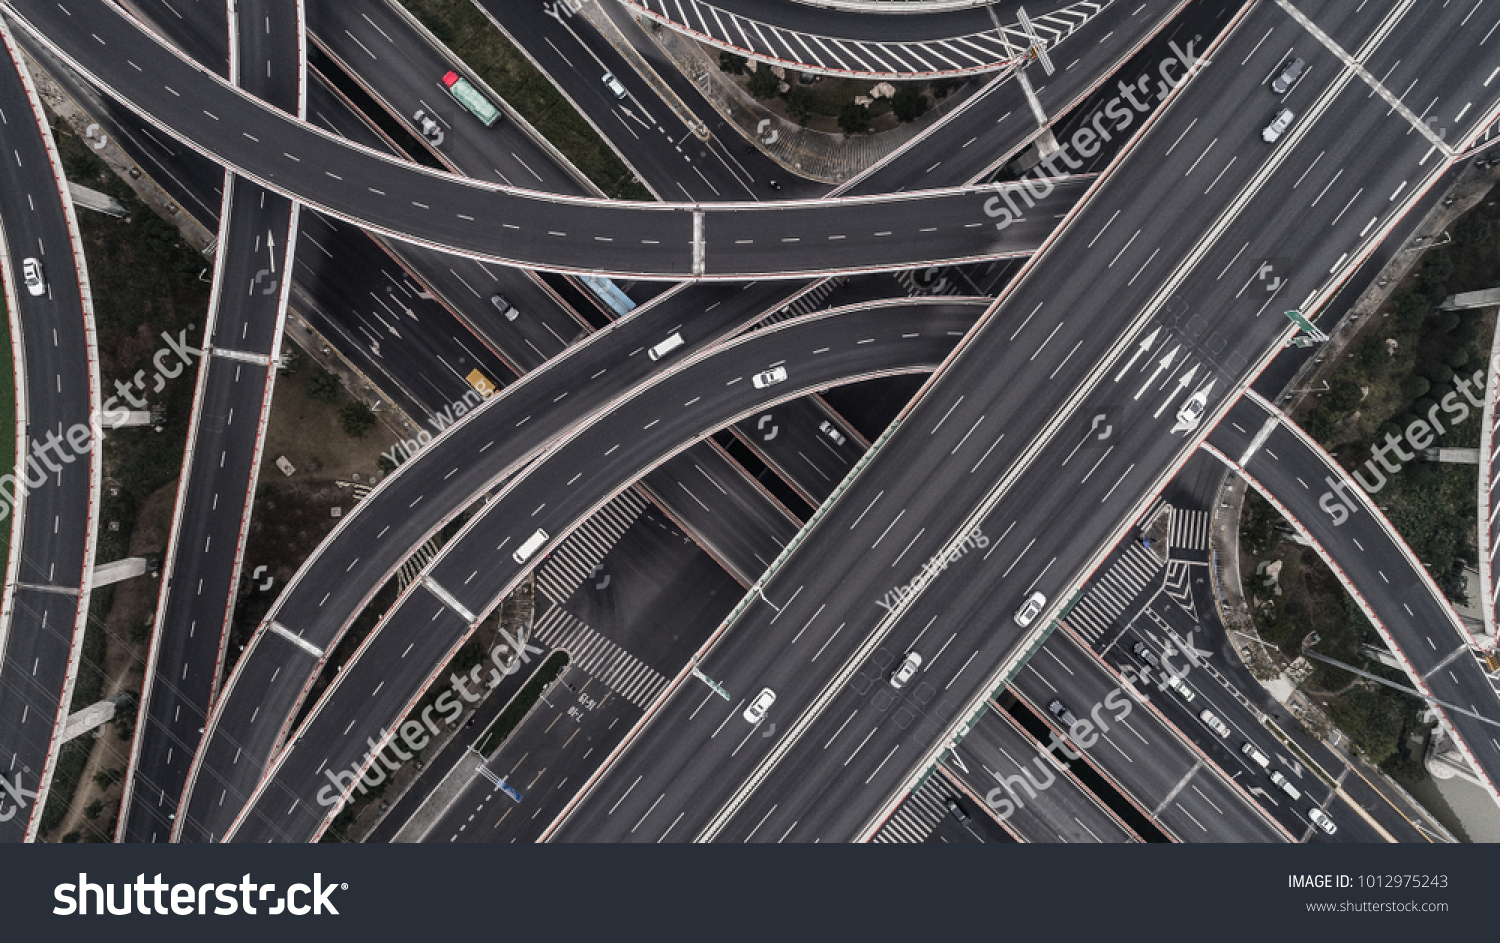 Aerial view of highway and overpass in city on a cloudy day #1012975243